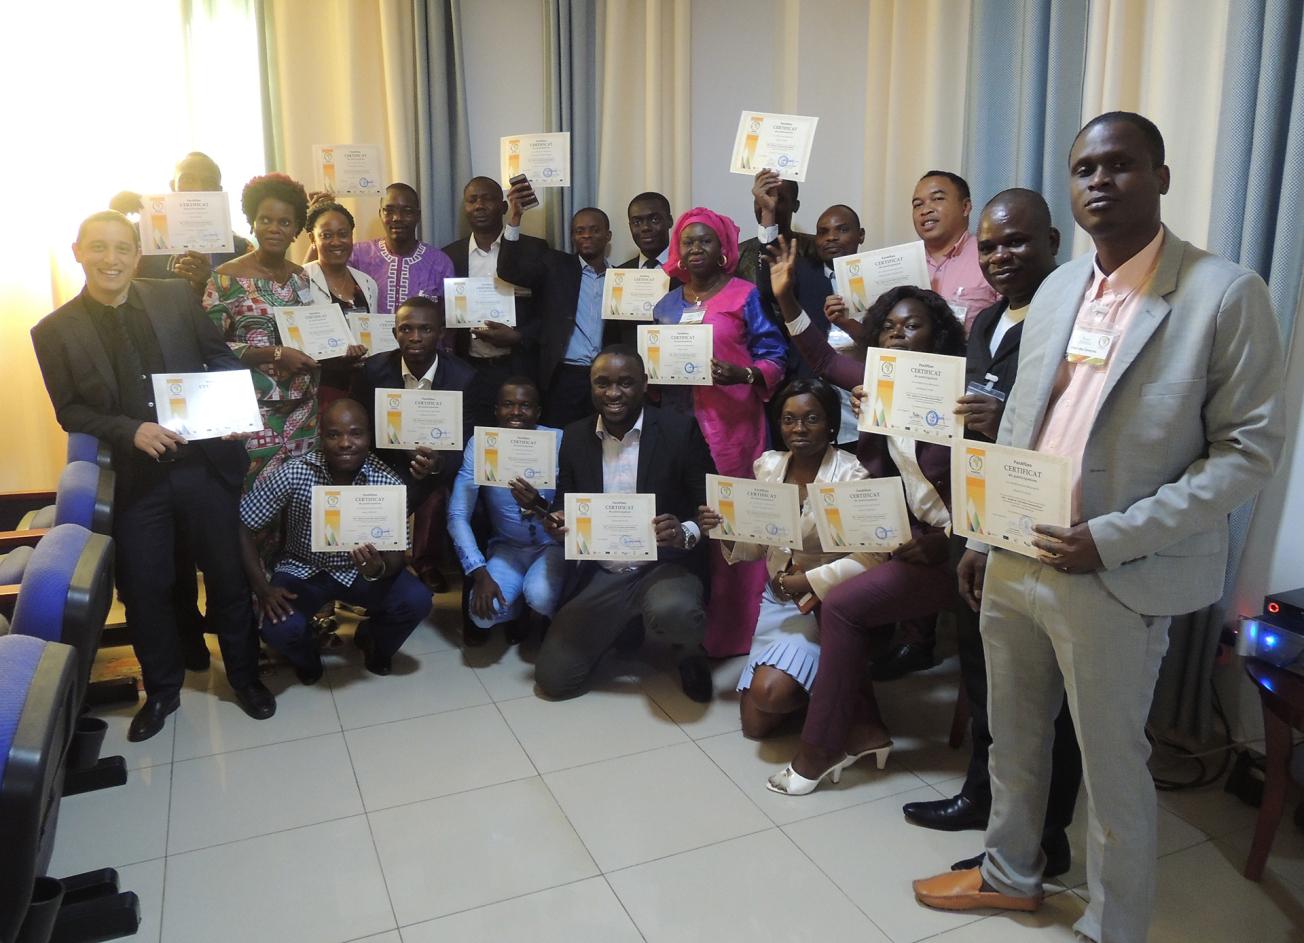 Training course on "Database management, processing georeferenced data and Geographical Information System interfaces" in Lomé, Togo. 